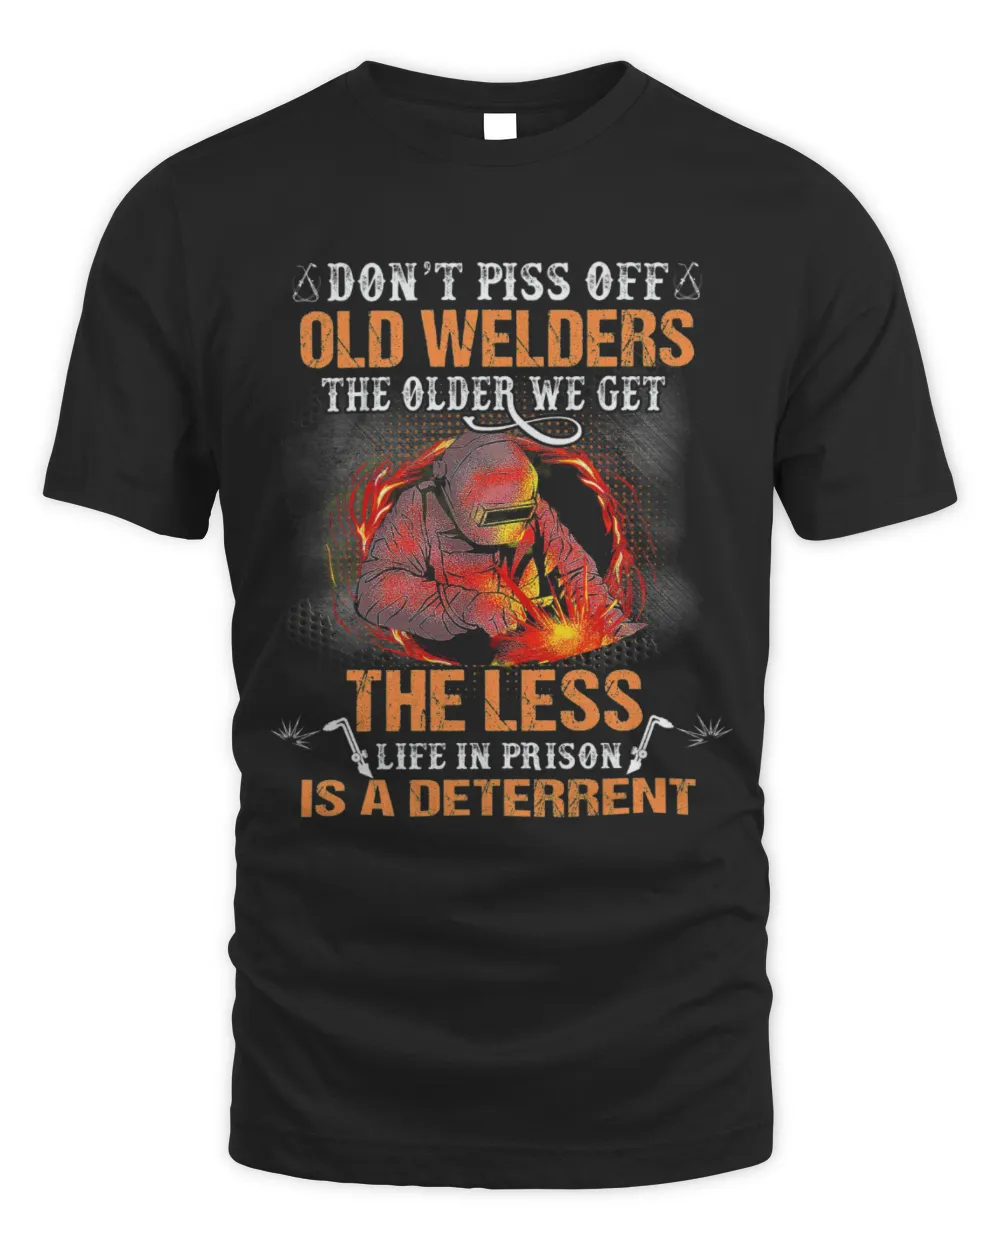 Don't Piss Off Old Welder